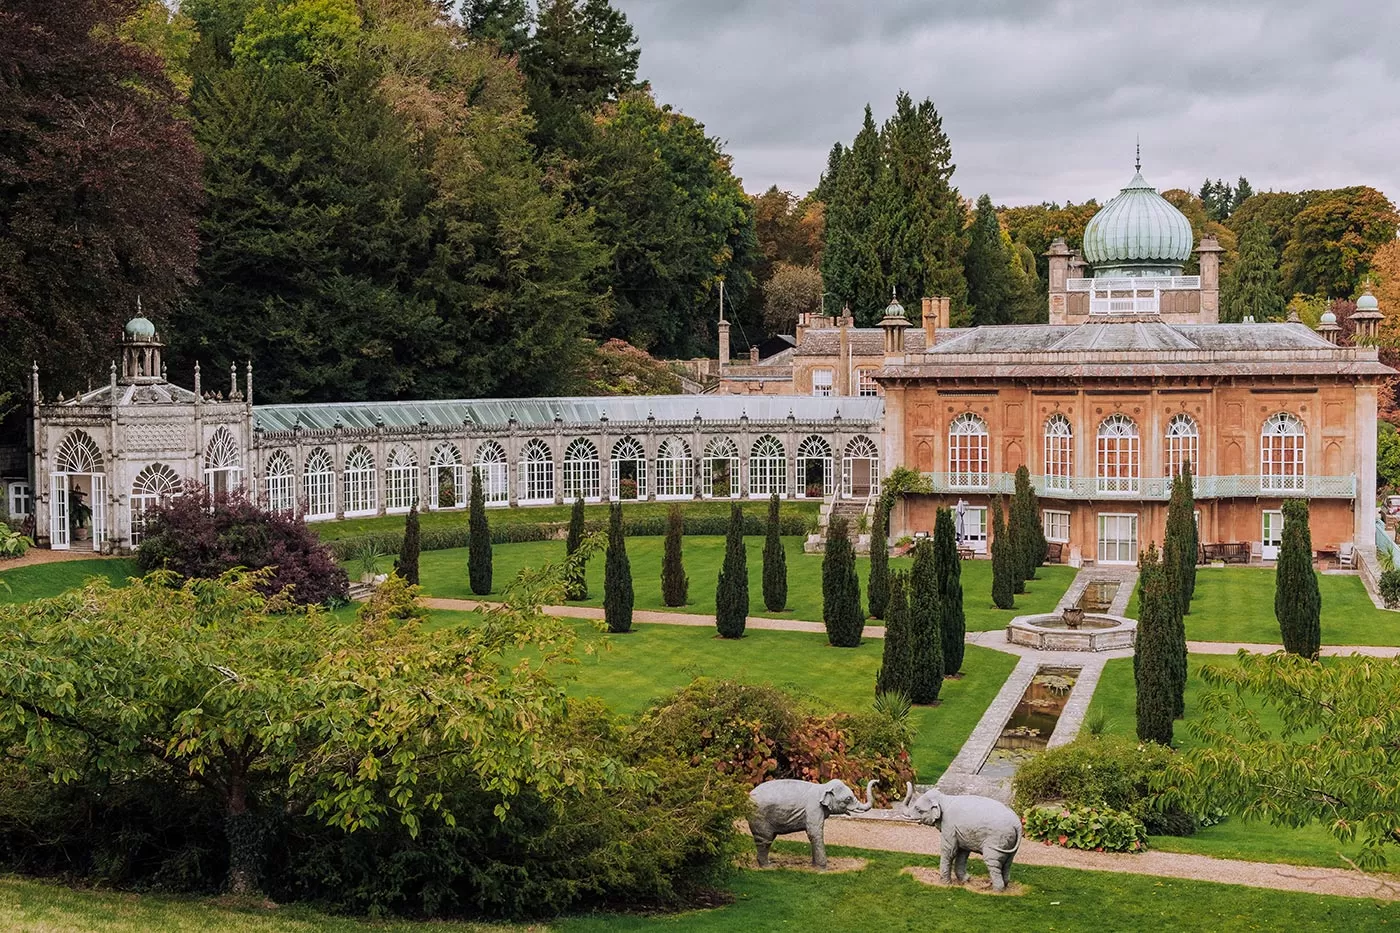 Things to do in Moreton-in-Marsh - The Cotswolds - Sezincote Estate and Garden - Orangery